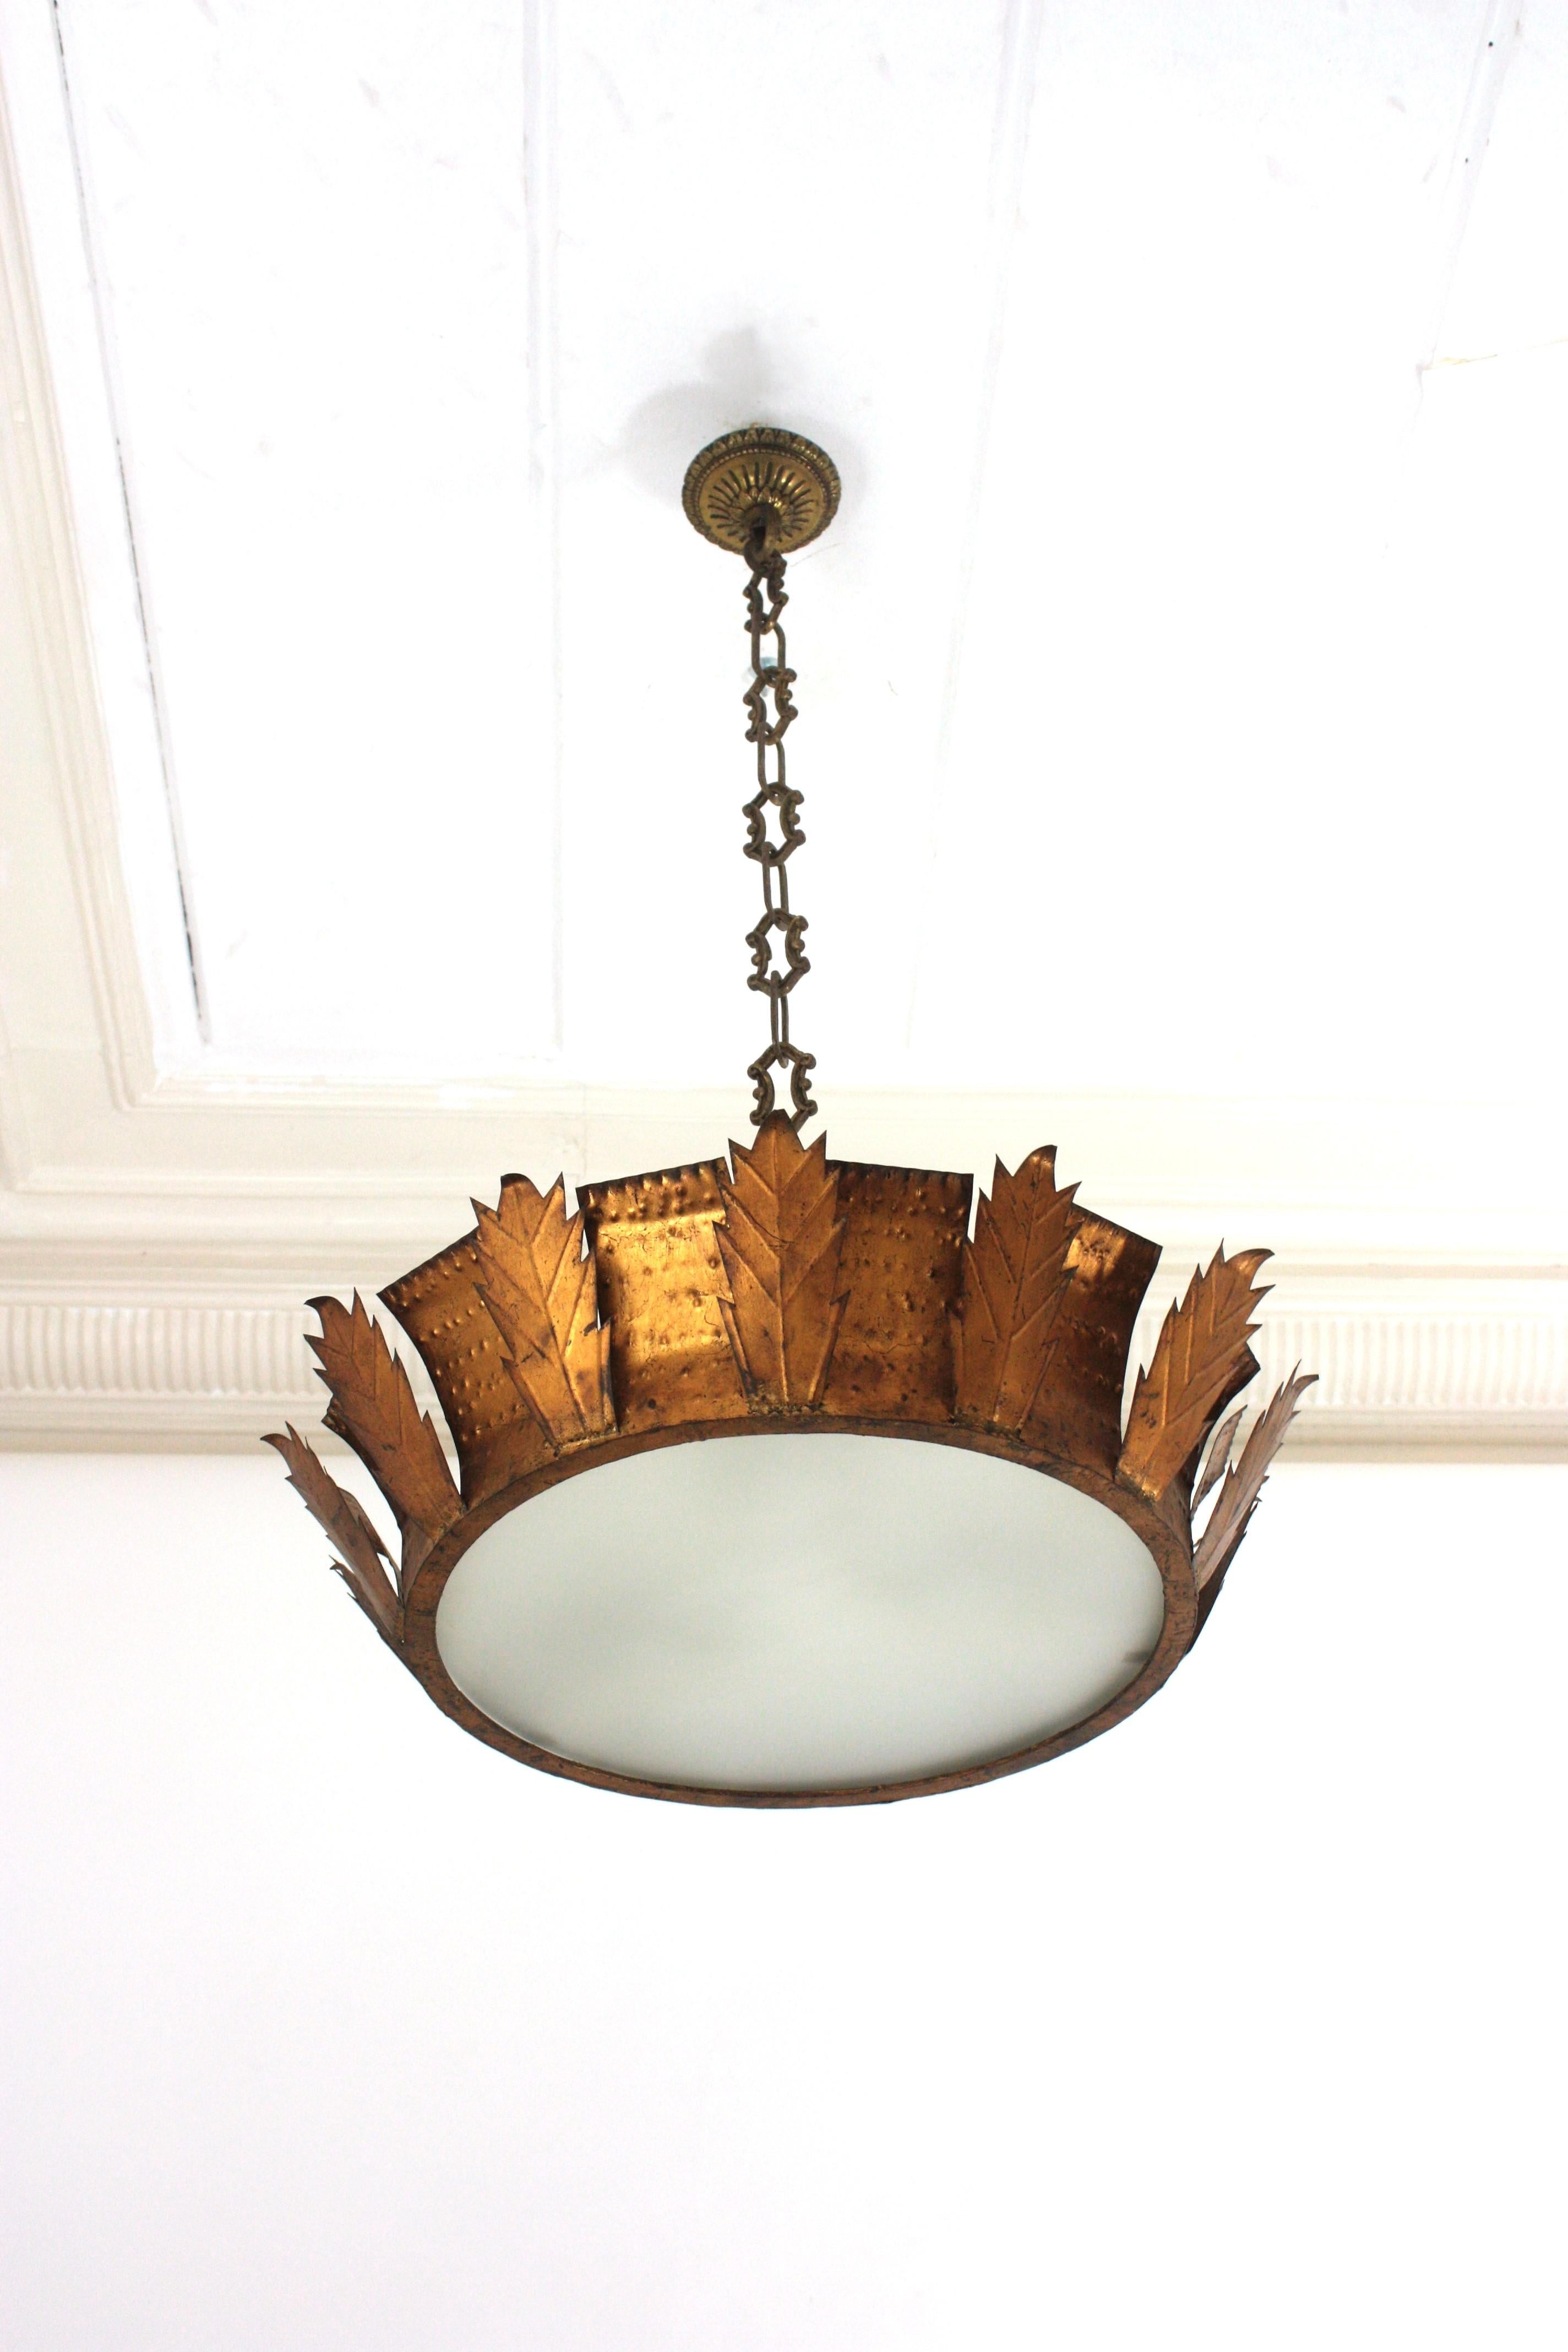 Large Sunburst Crown Flush Mount, Iron, Gold Leaf

Large hand-hammered iron  sunburst crown ceiling light fixture with frosted glass panel difusser. Spain, 1950s
This ceiling flush mount was handcrafted in Spain at the Mid-Century Modern period in